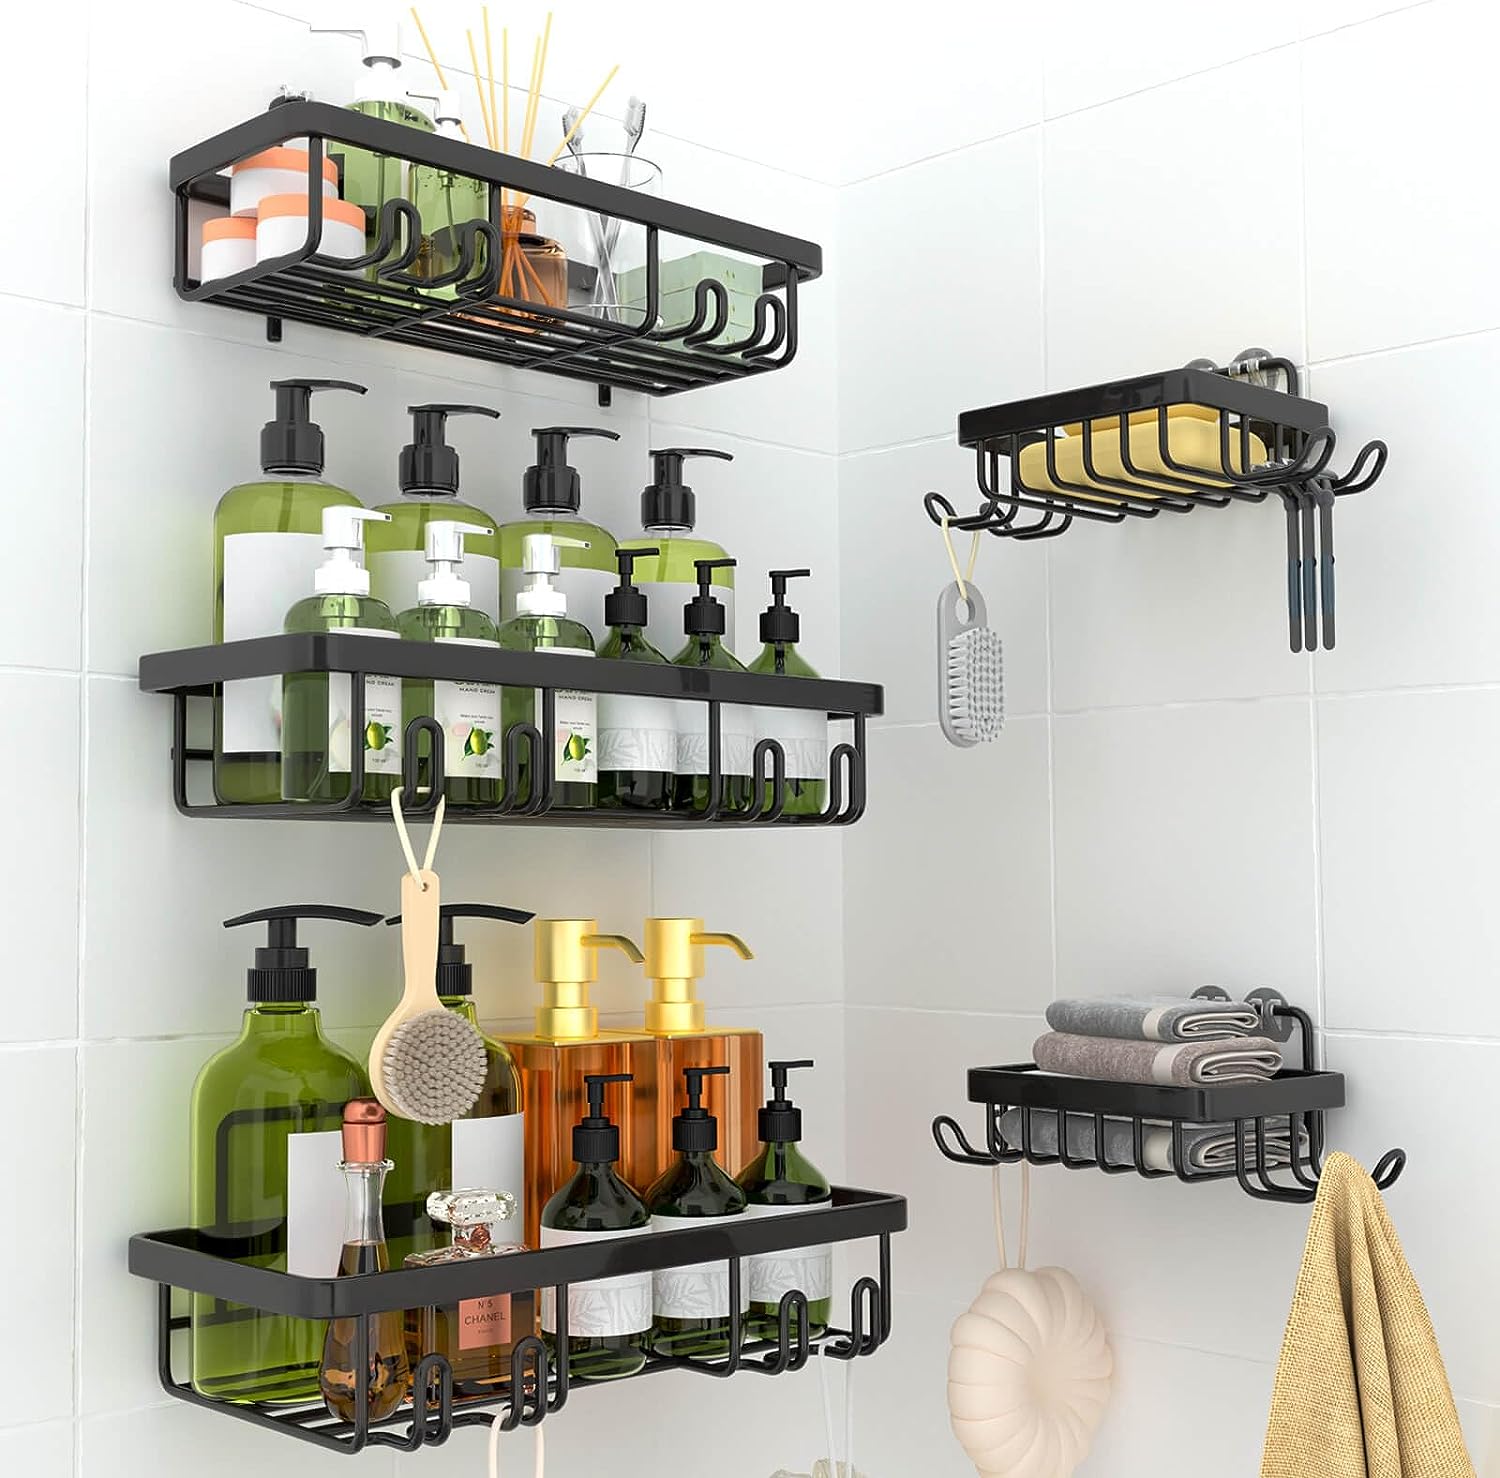  Sakugi Shower Caddy - Large Adhesive Shower Organizer,  Rustproof Shower Shelves for inside Shower, Stainless Steel Shower Rack for  Bathroom, Apartment Essentials, No Drill, Gray, 2 Pack : Home & Kitchen